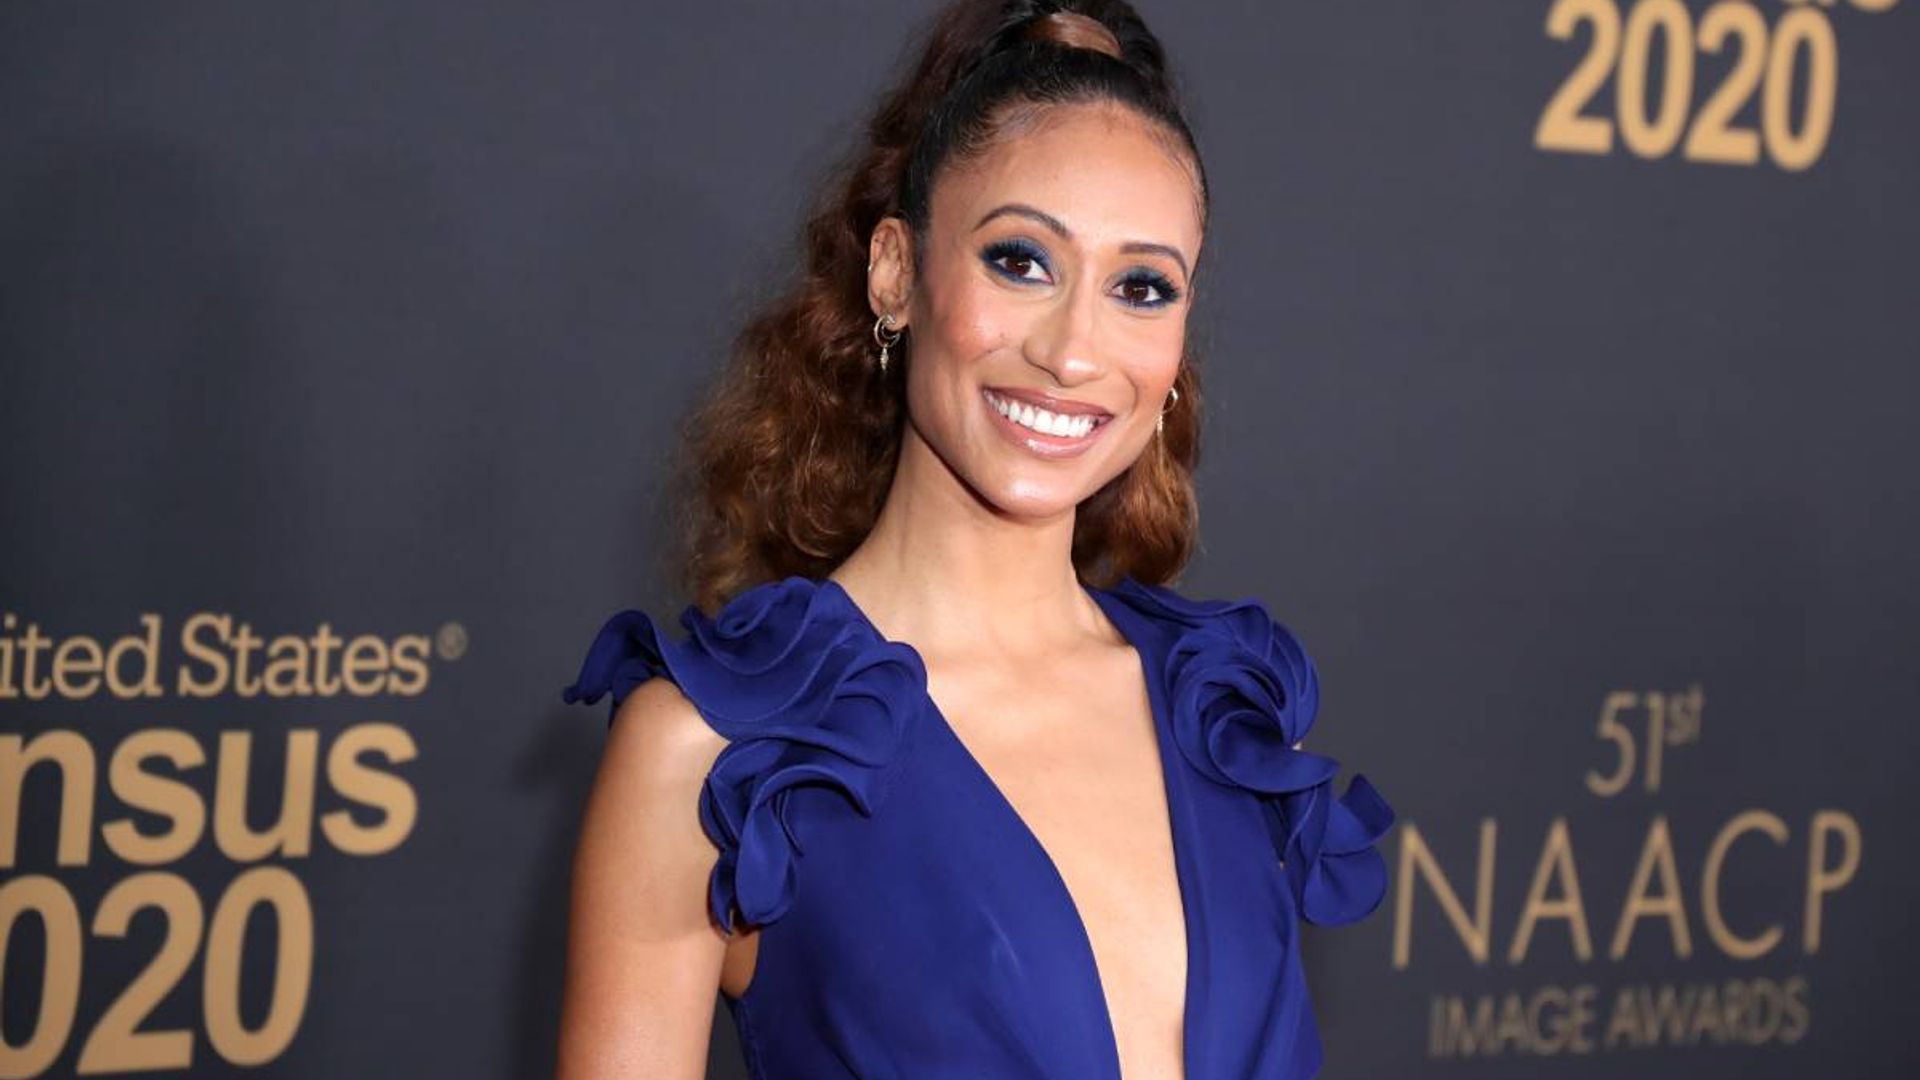 Elaine Welteroth's incredible toned figure is all the fitness inspo we need for 2021